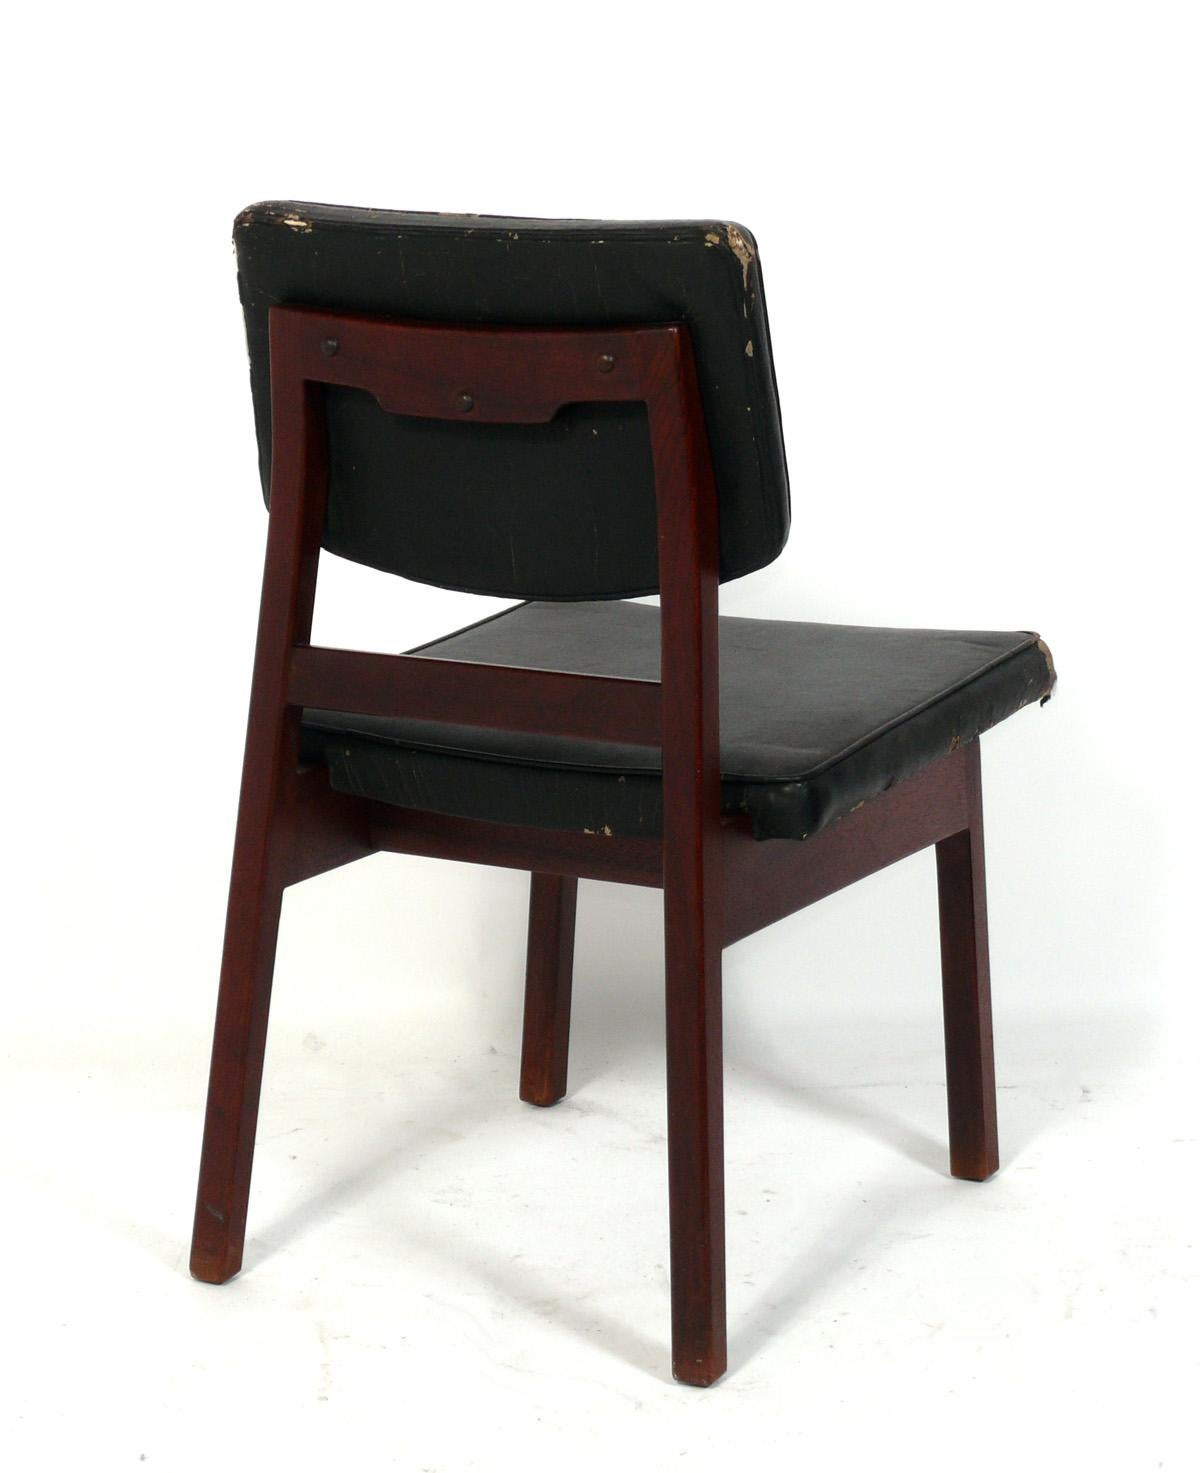 American Jens Risom Dining Chairs Refinished and Reupholstered